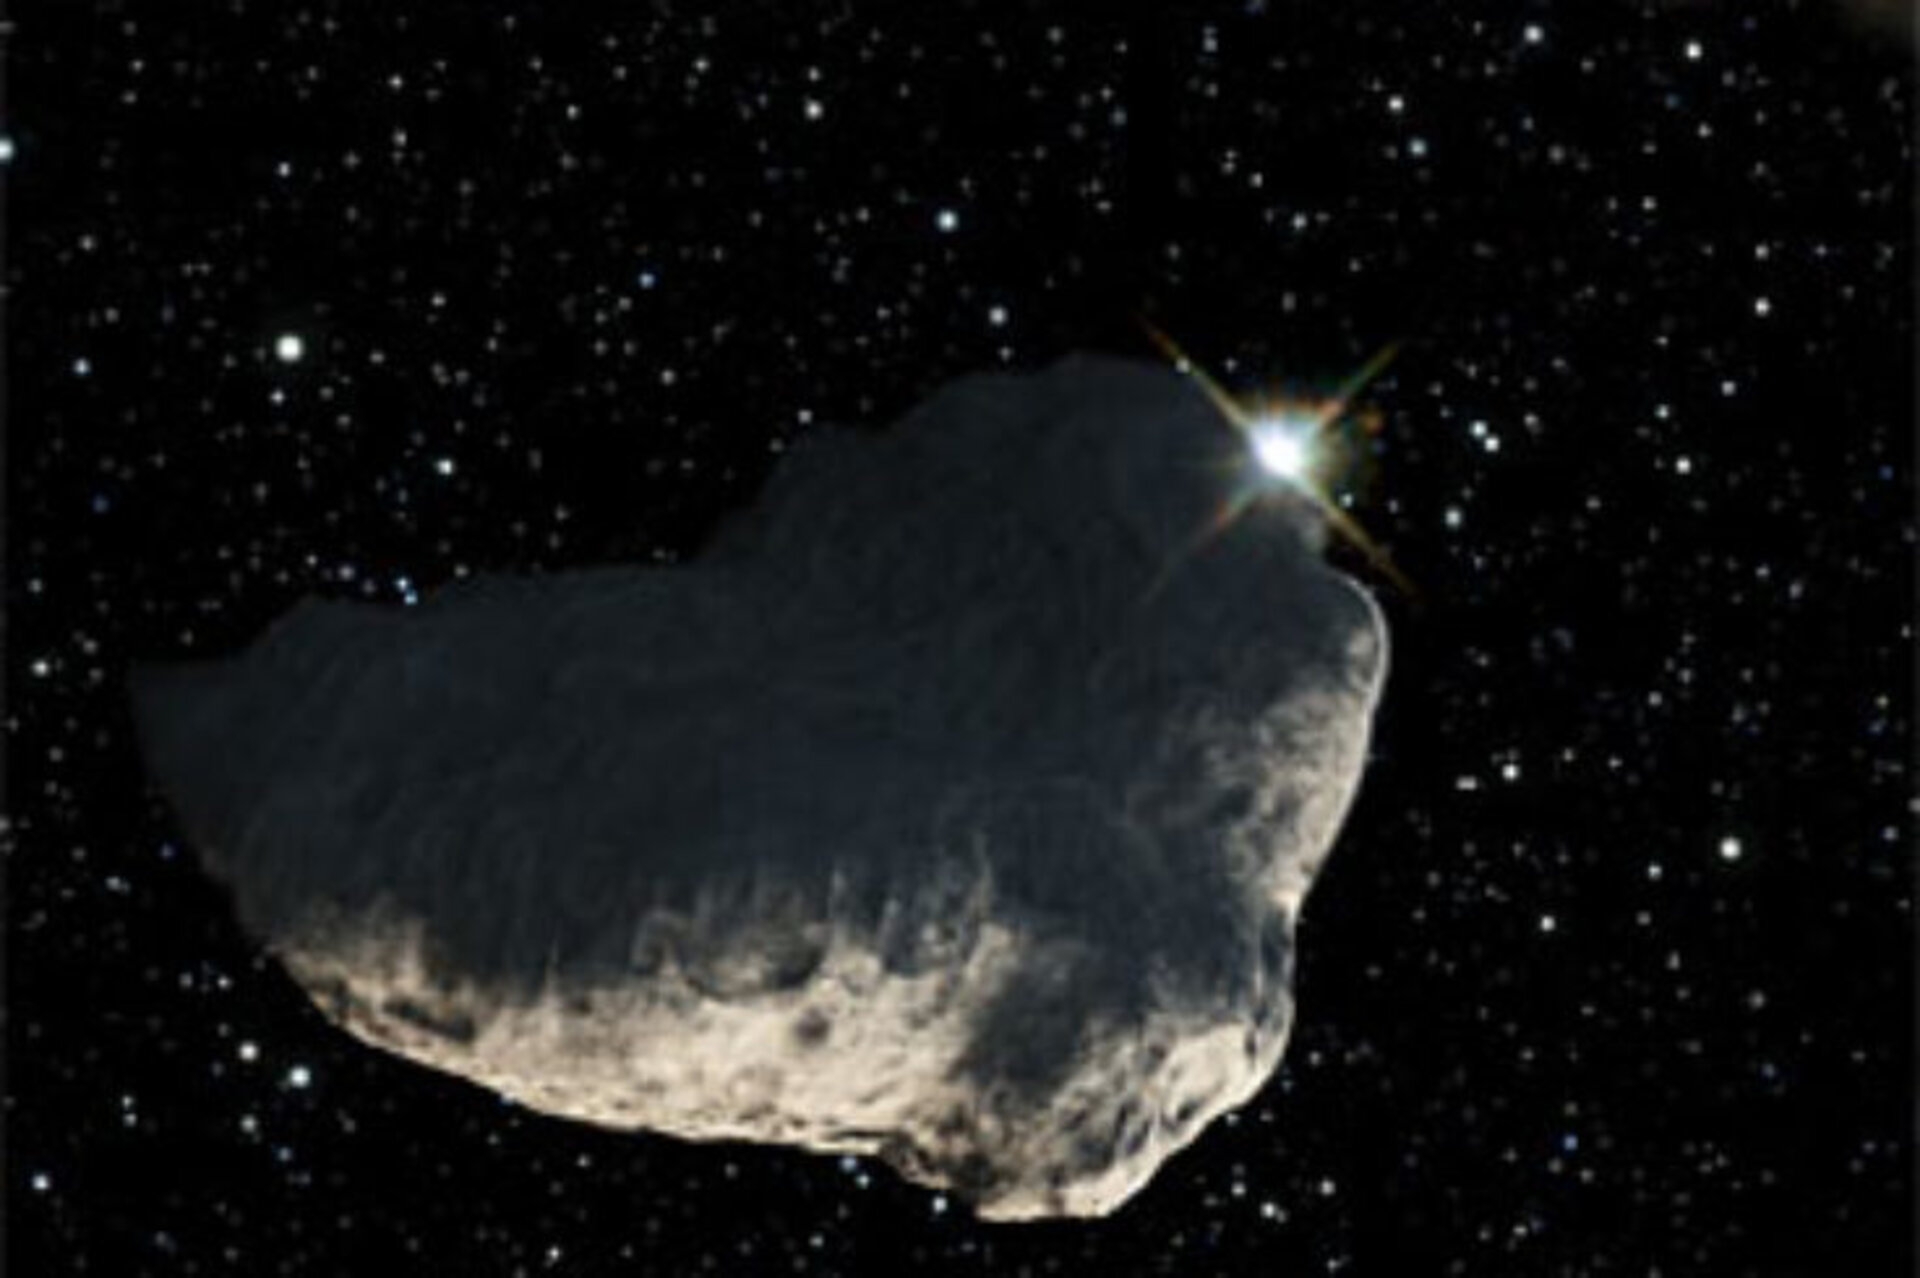 Asteroid occulting a distant star